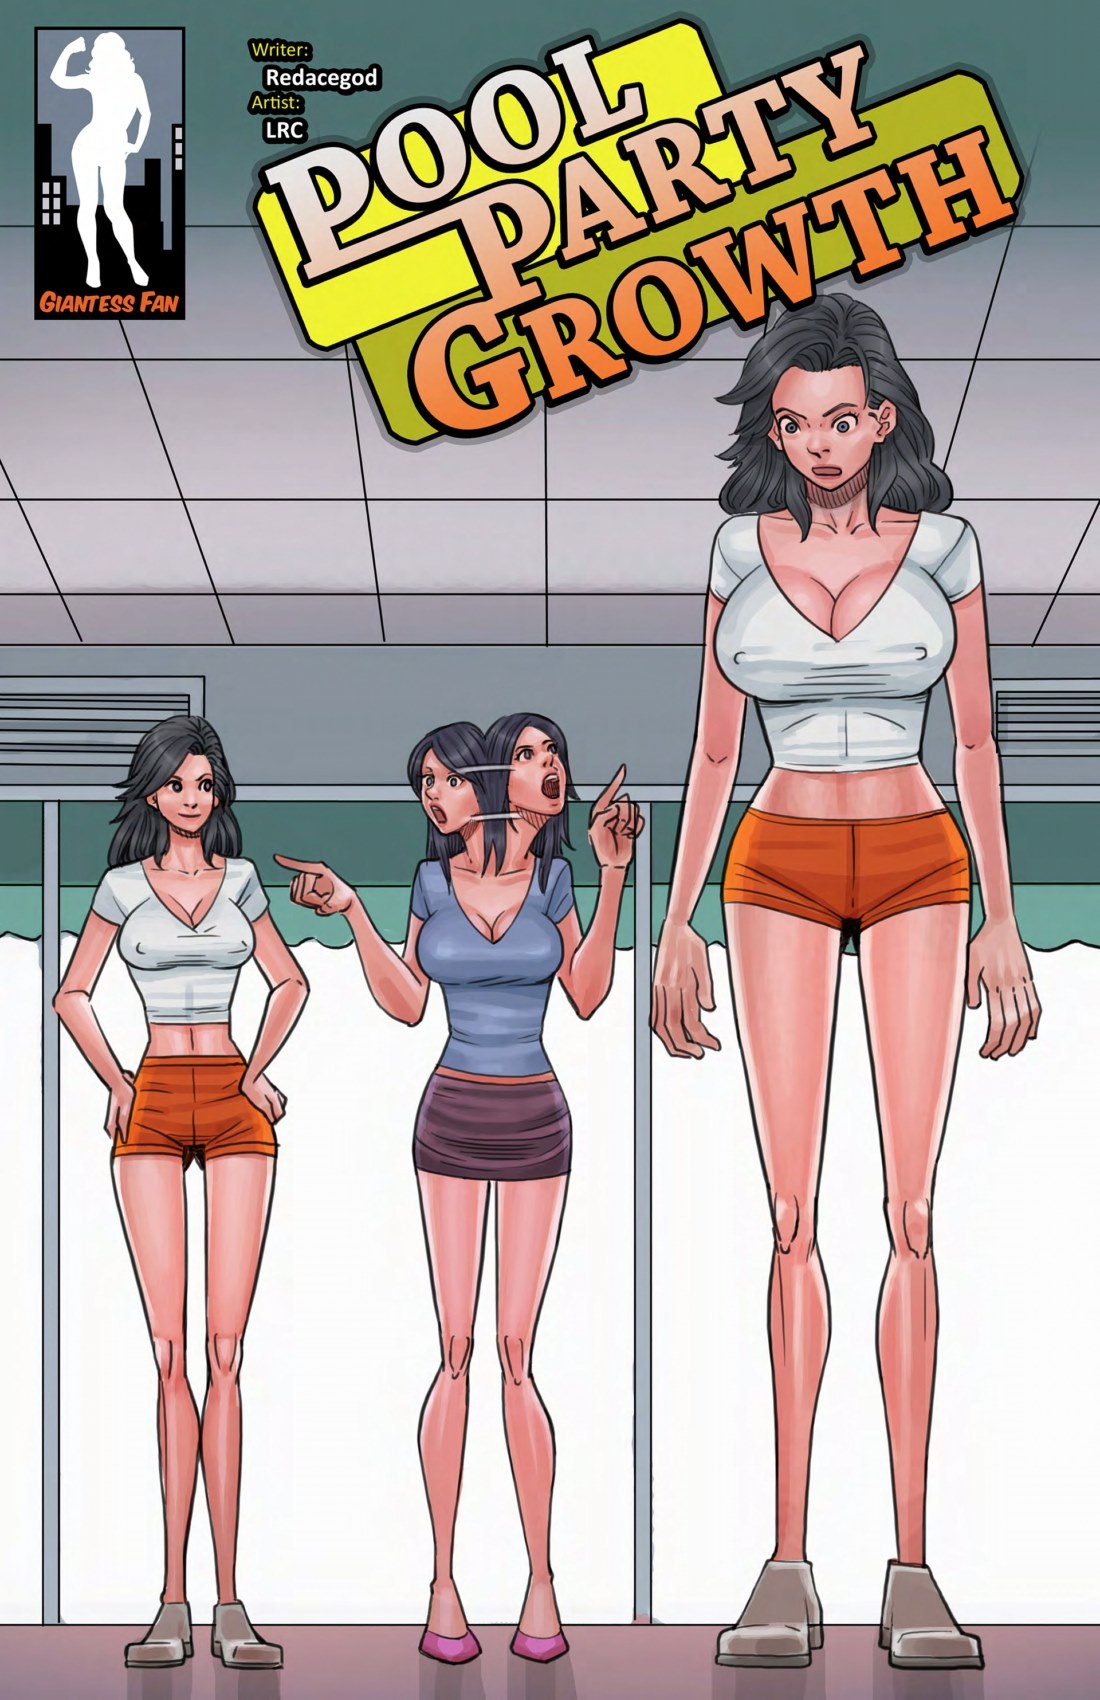 Giantess growth expansion